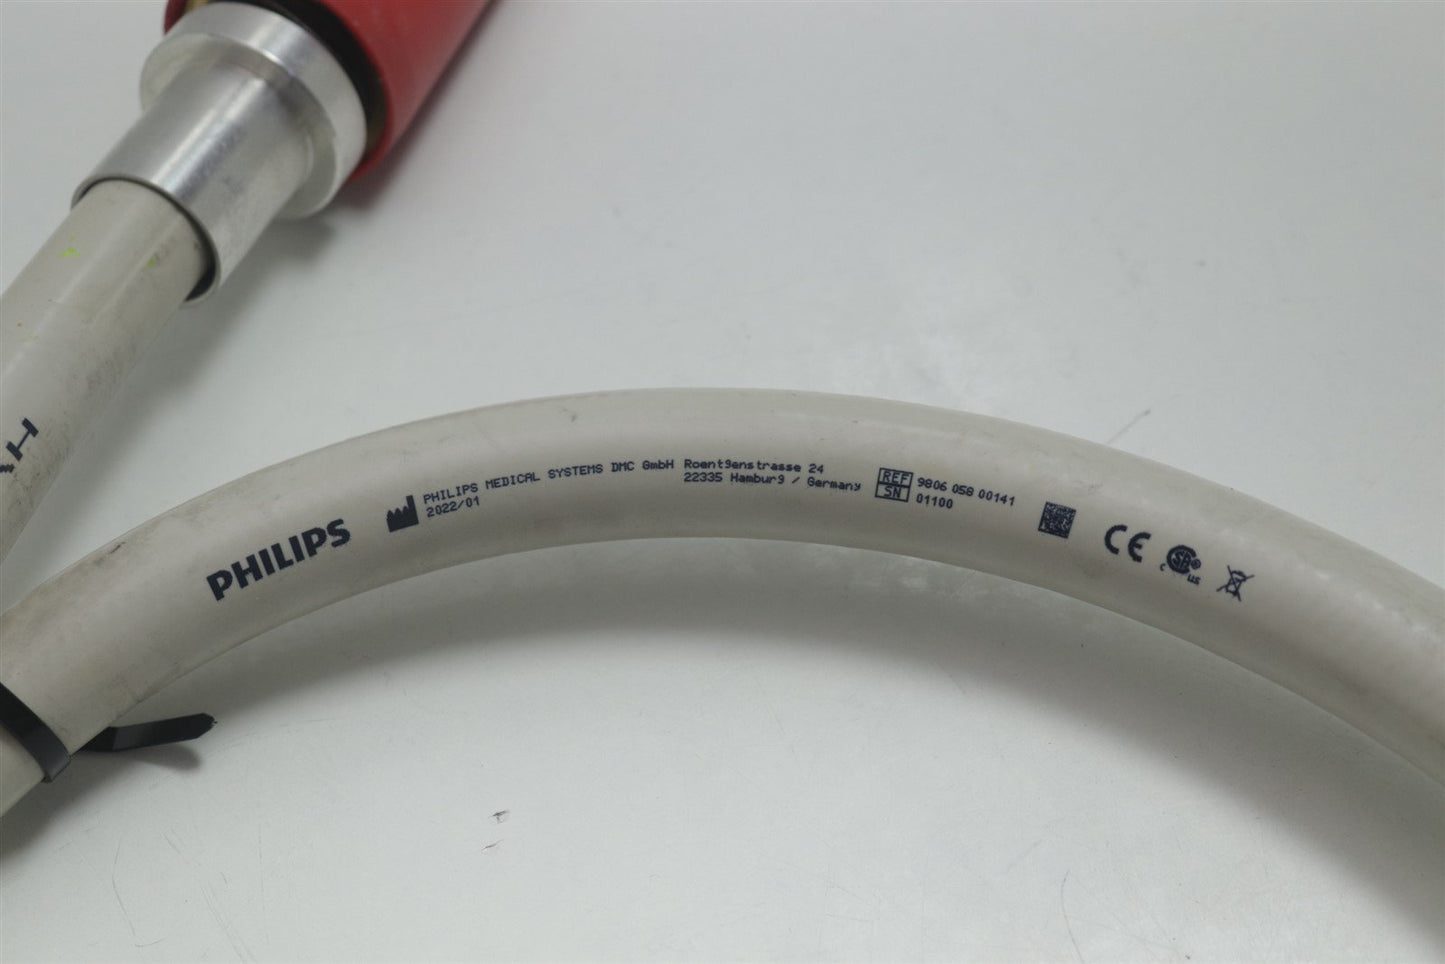 Philips Brilliance CT HV Cable X-Ray Accessories 9806 058 00141